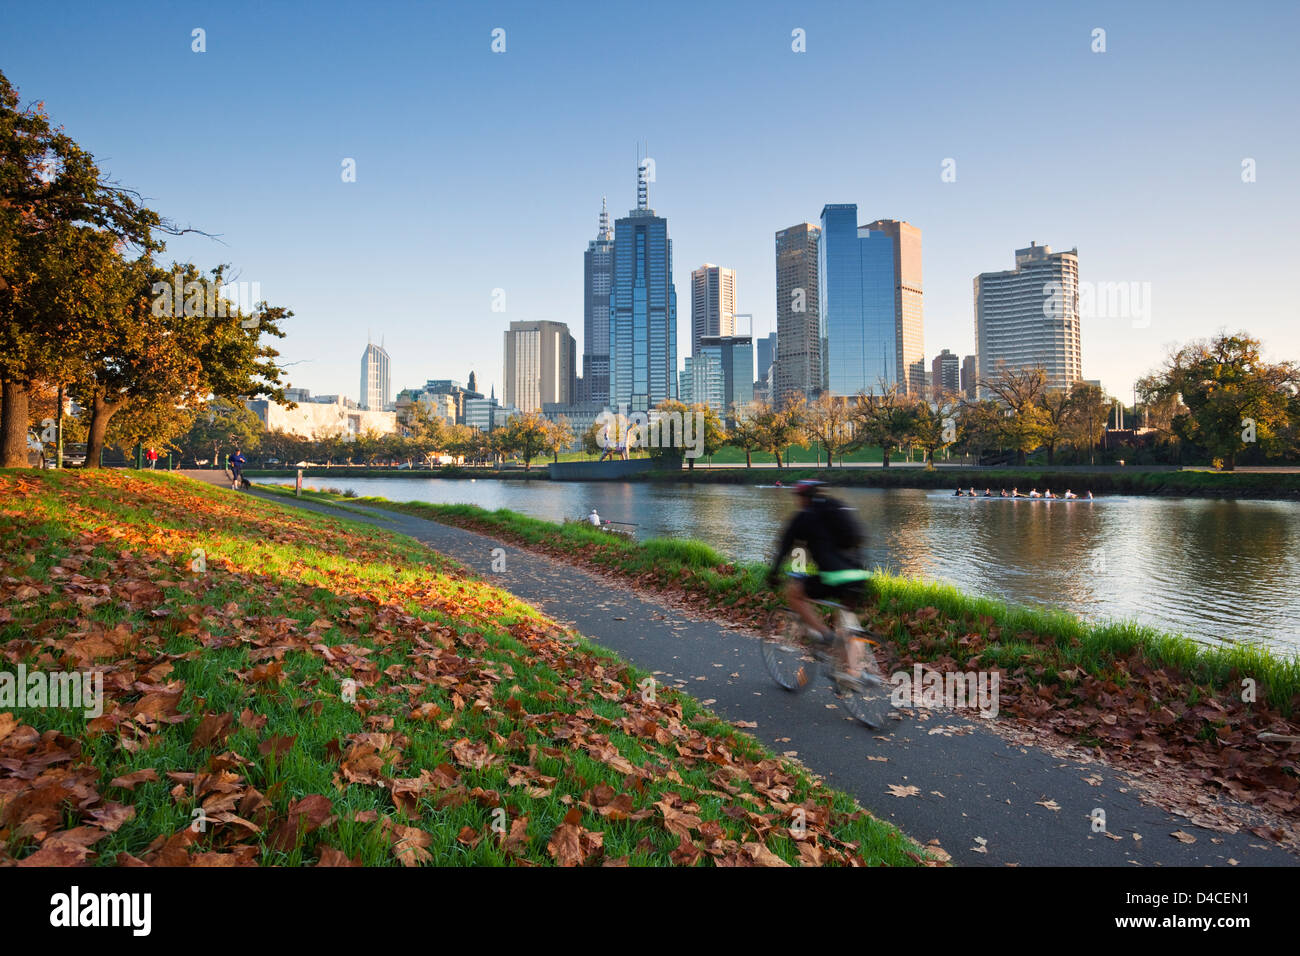 Cyclist on banks of Yarra River with city skyline in background. Melbourne, Victoria, Australia Stock Photo